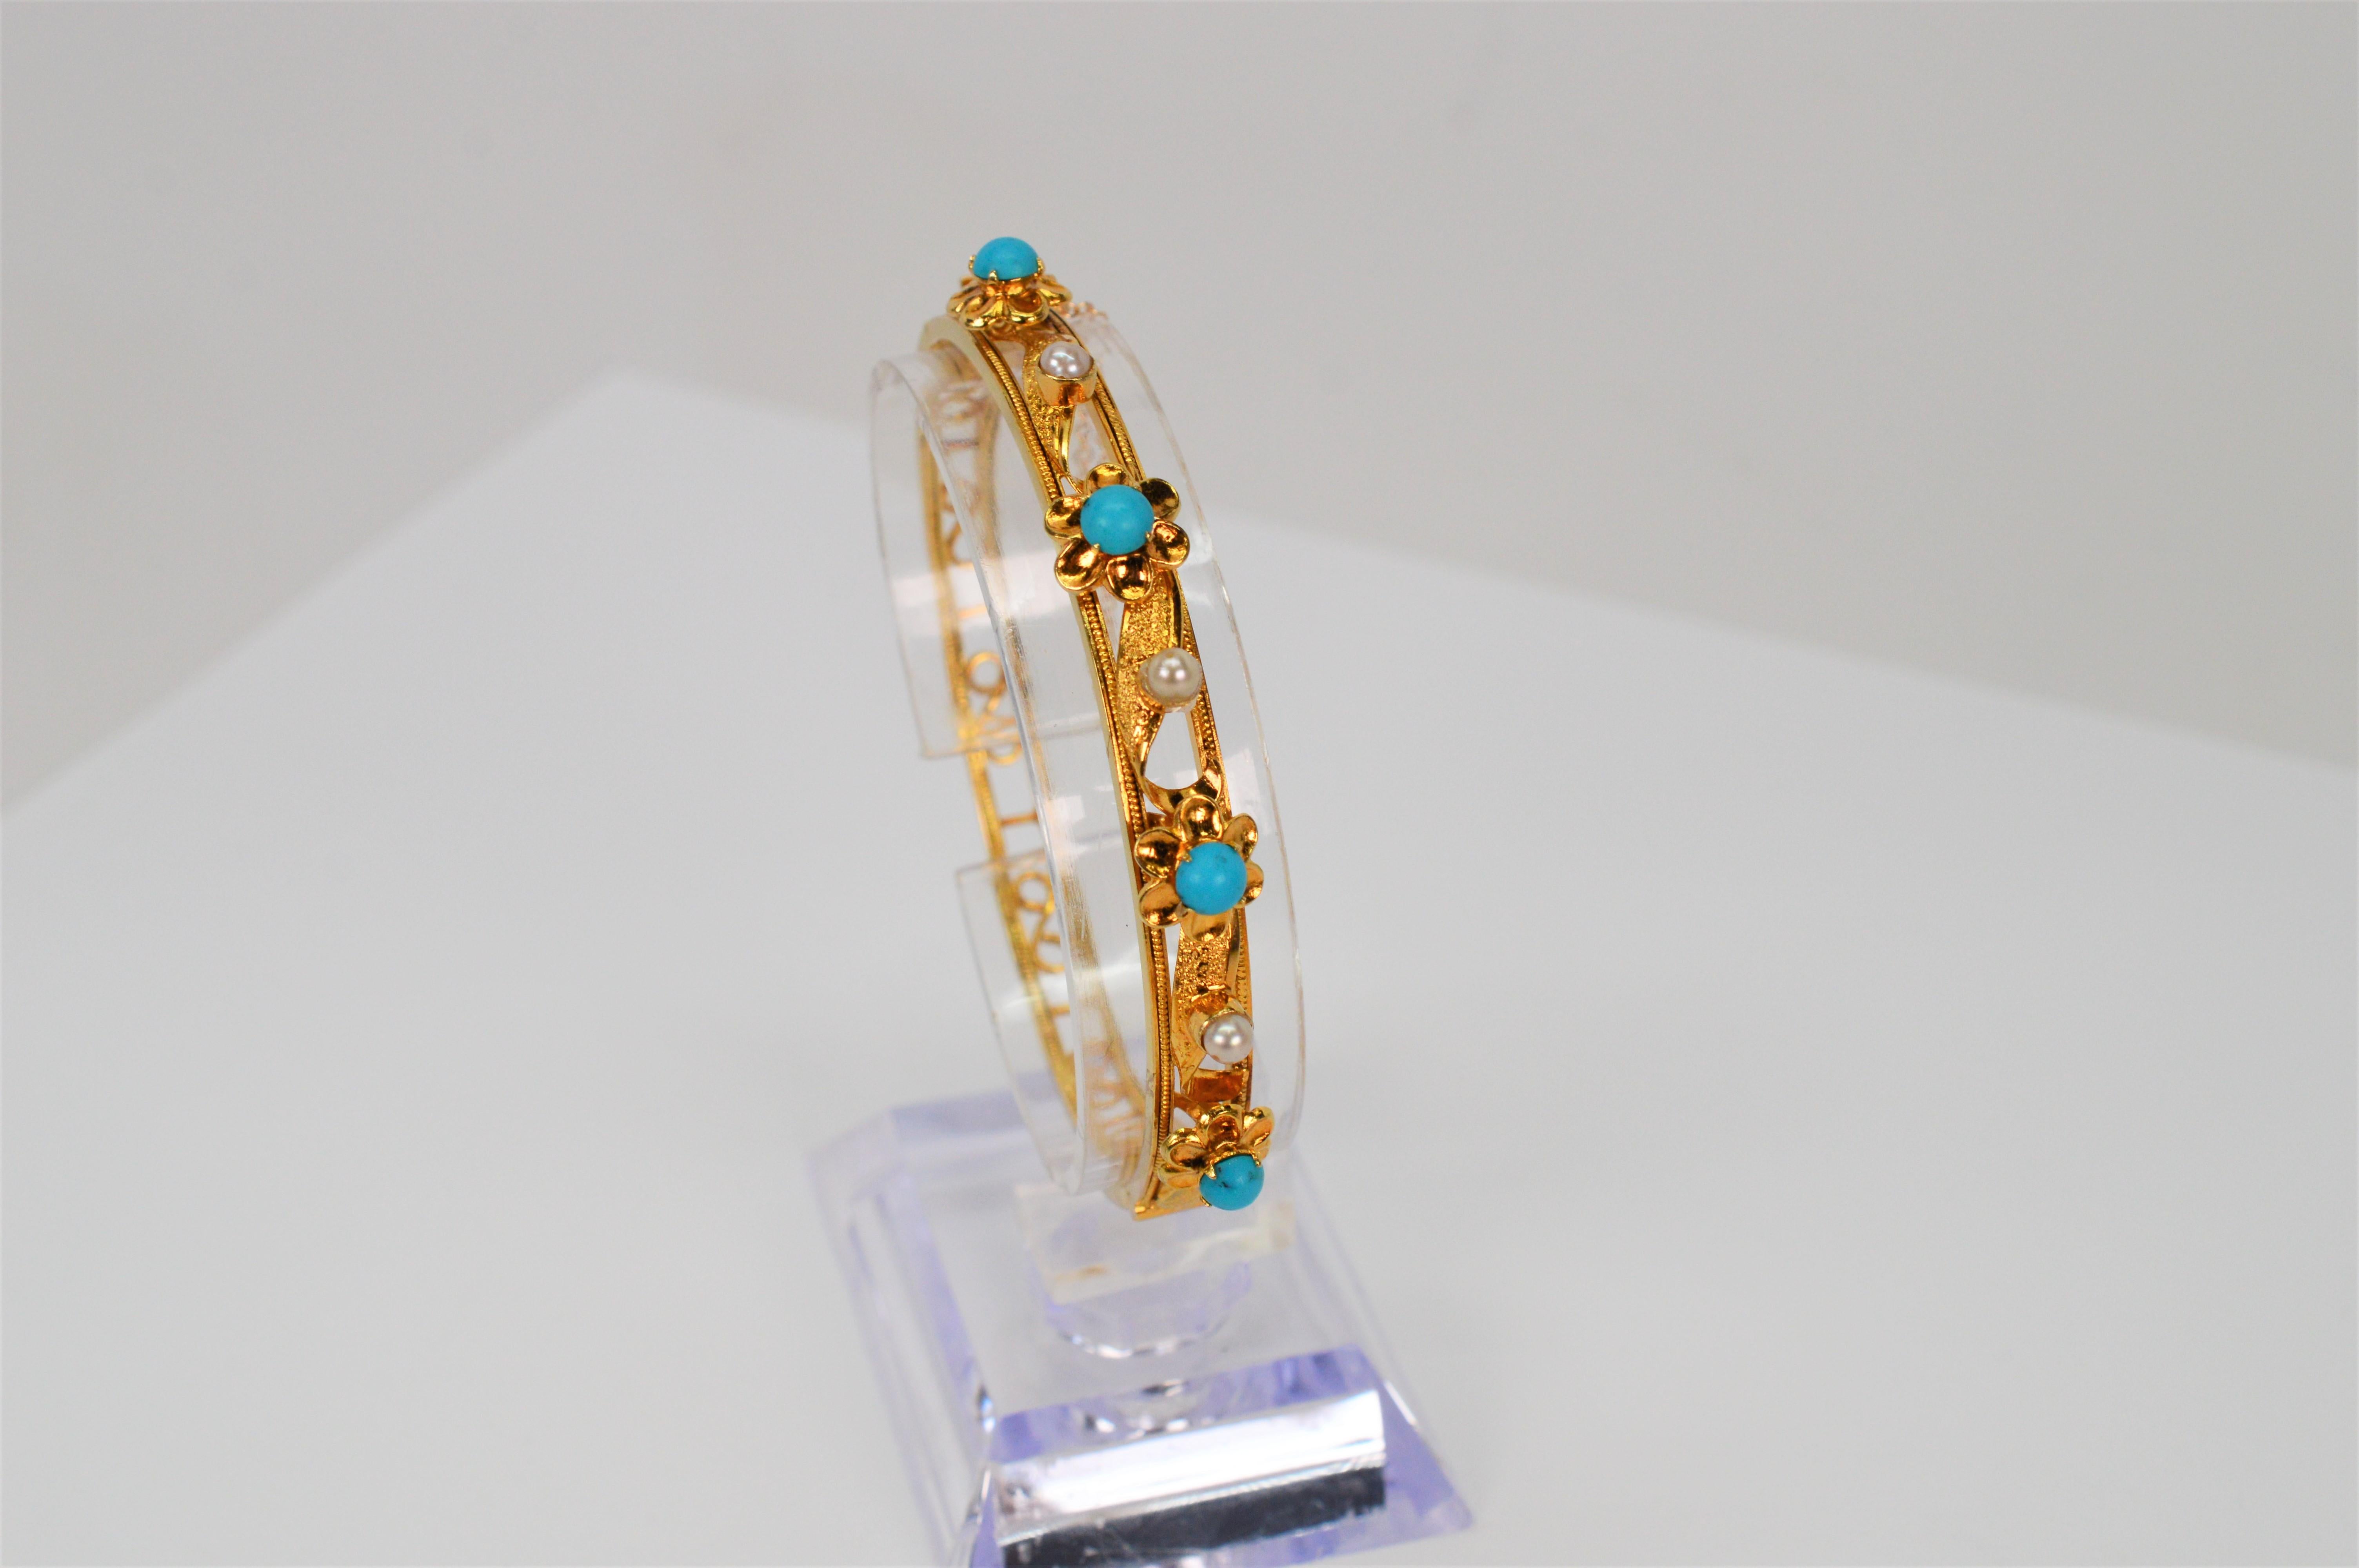 In 14 karat yellow gold, open decorative scroll work with floral inspired gold appliques are hand assembled across the placket of this 
appealing bangle bracelet. Adding color and artistic interest are pretty floral buds accented with 4mm turquoise